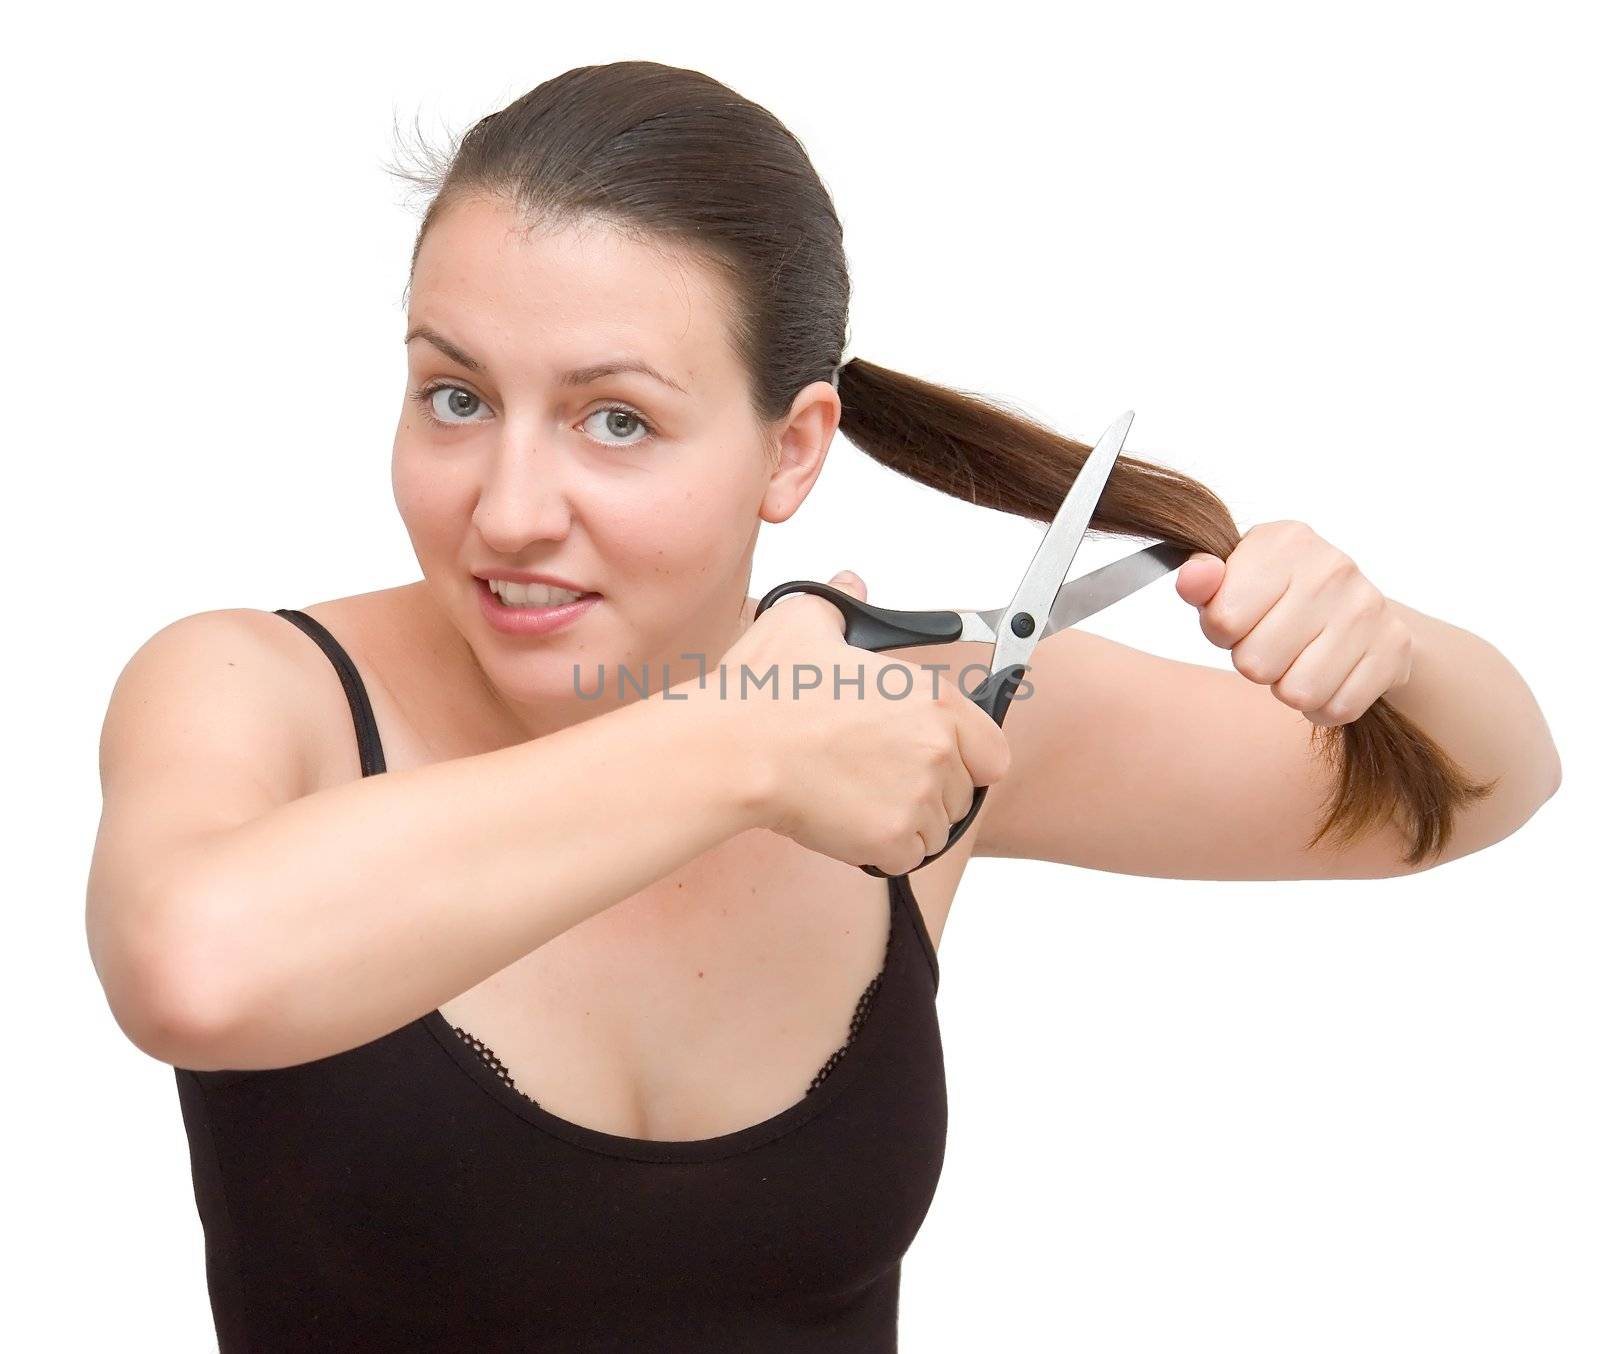 The young woman cuts off the hair on a white background